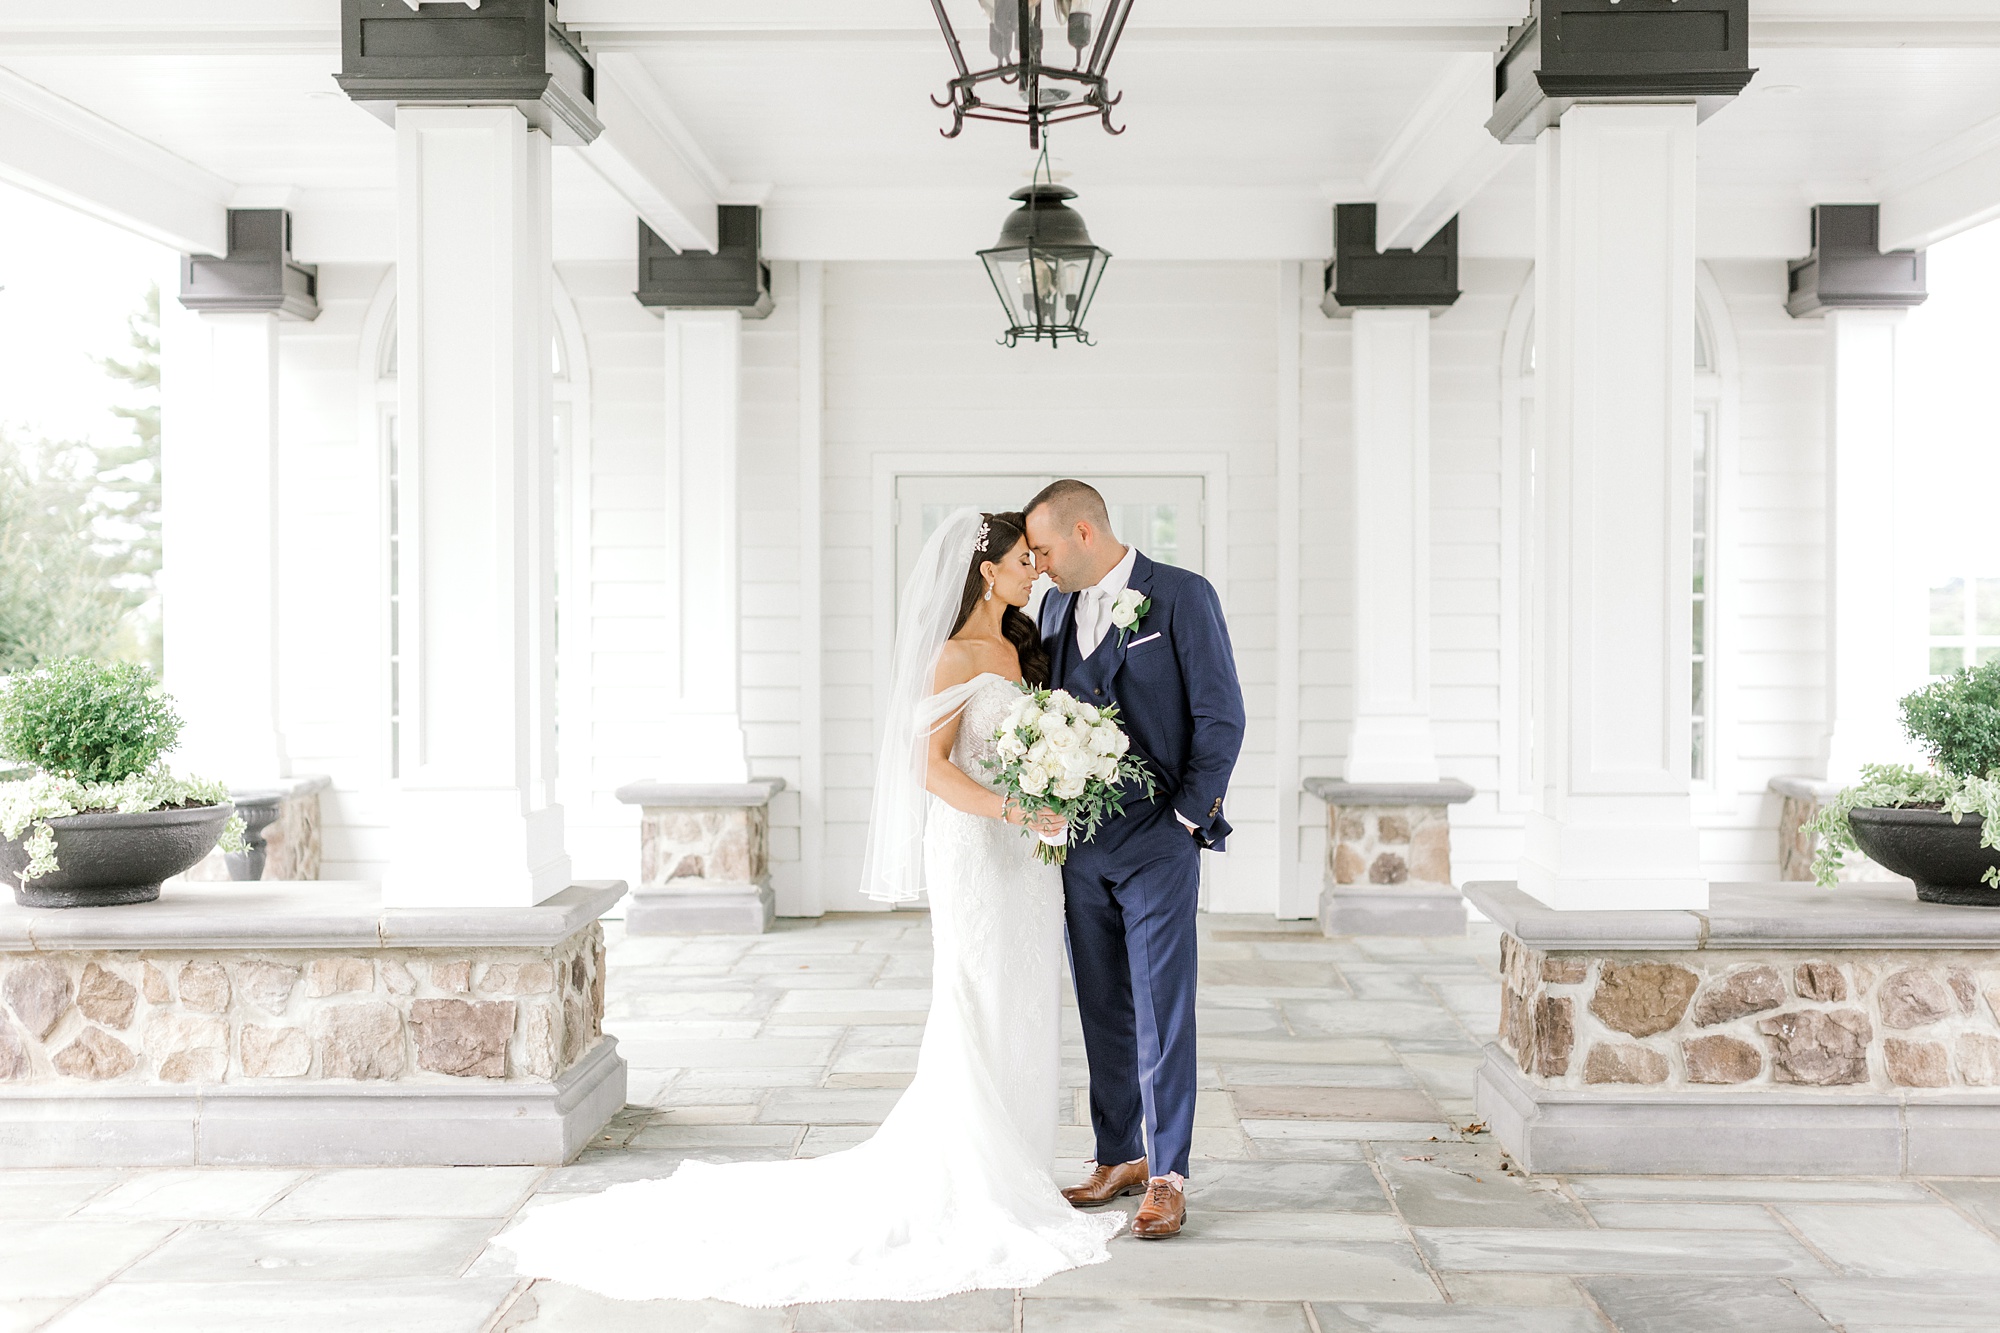 bride and groom hug under awning at Ryland Inn while bride holds white rose bouquet